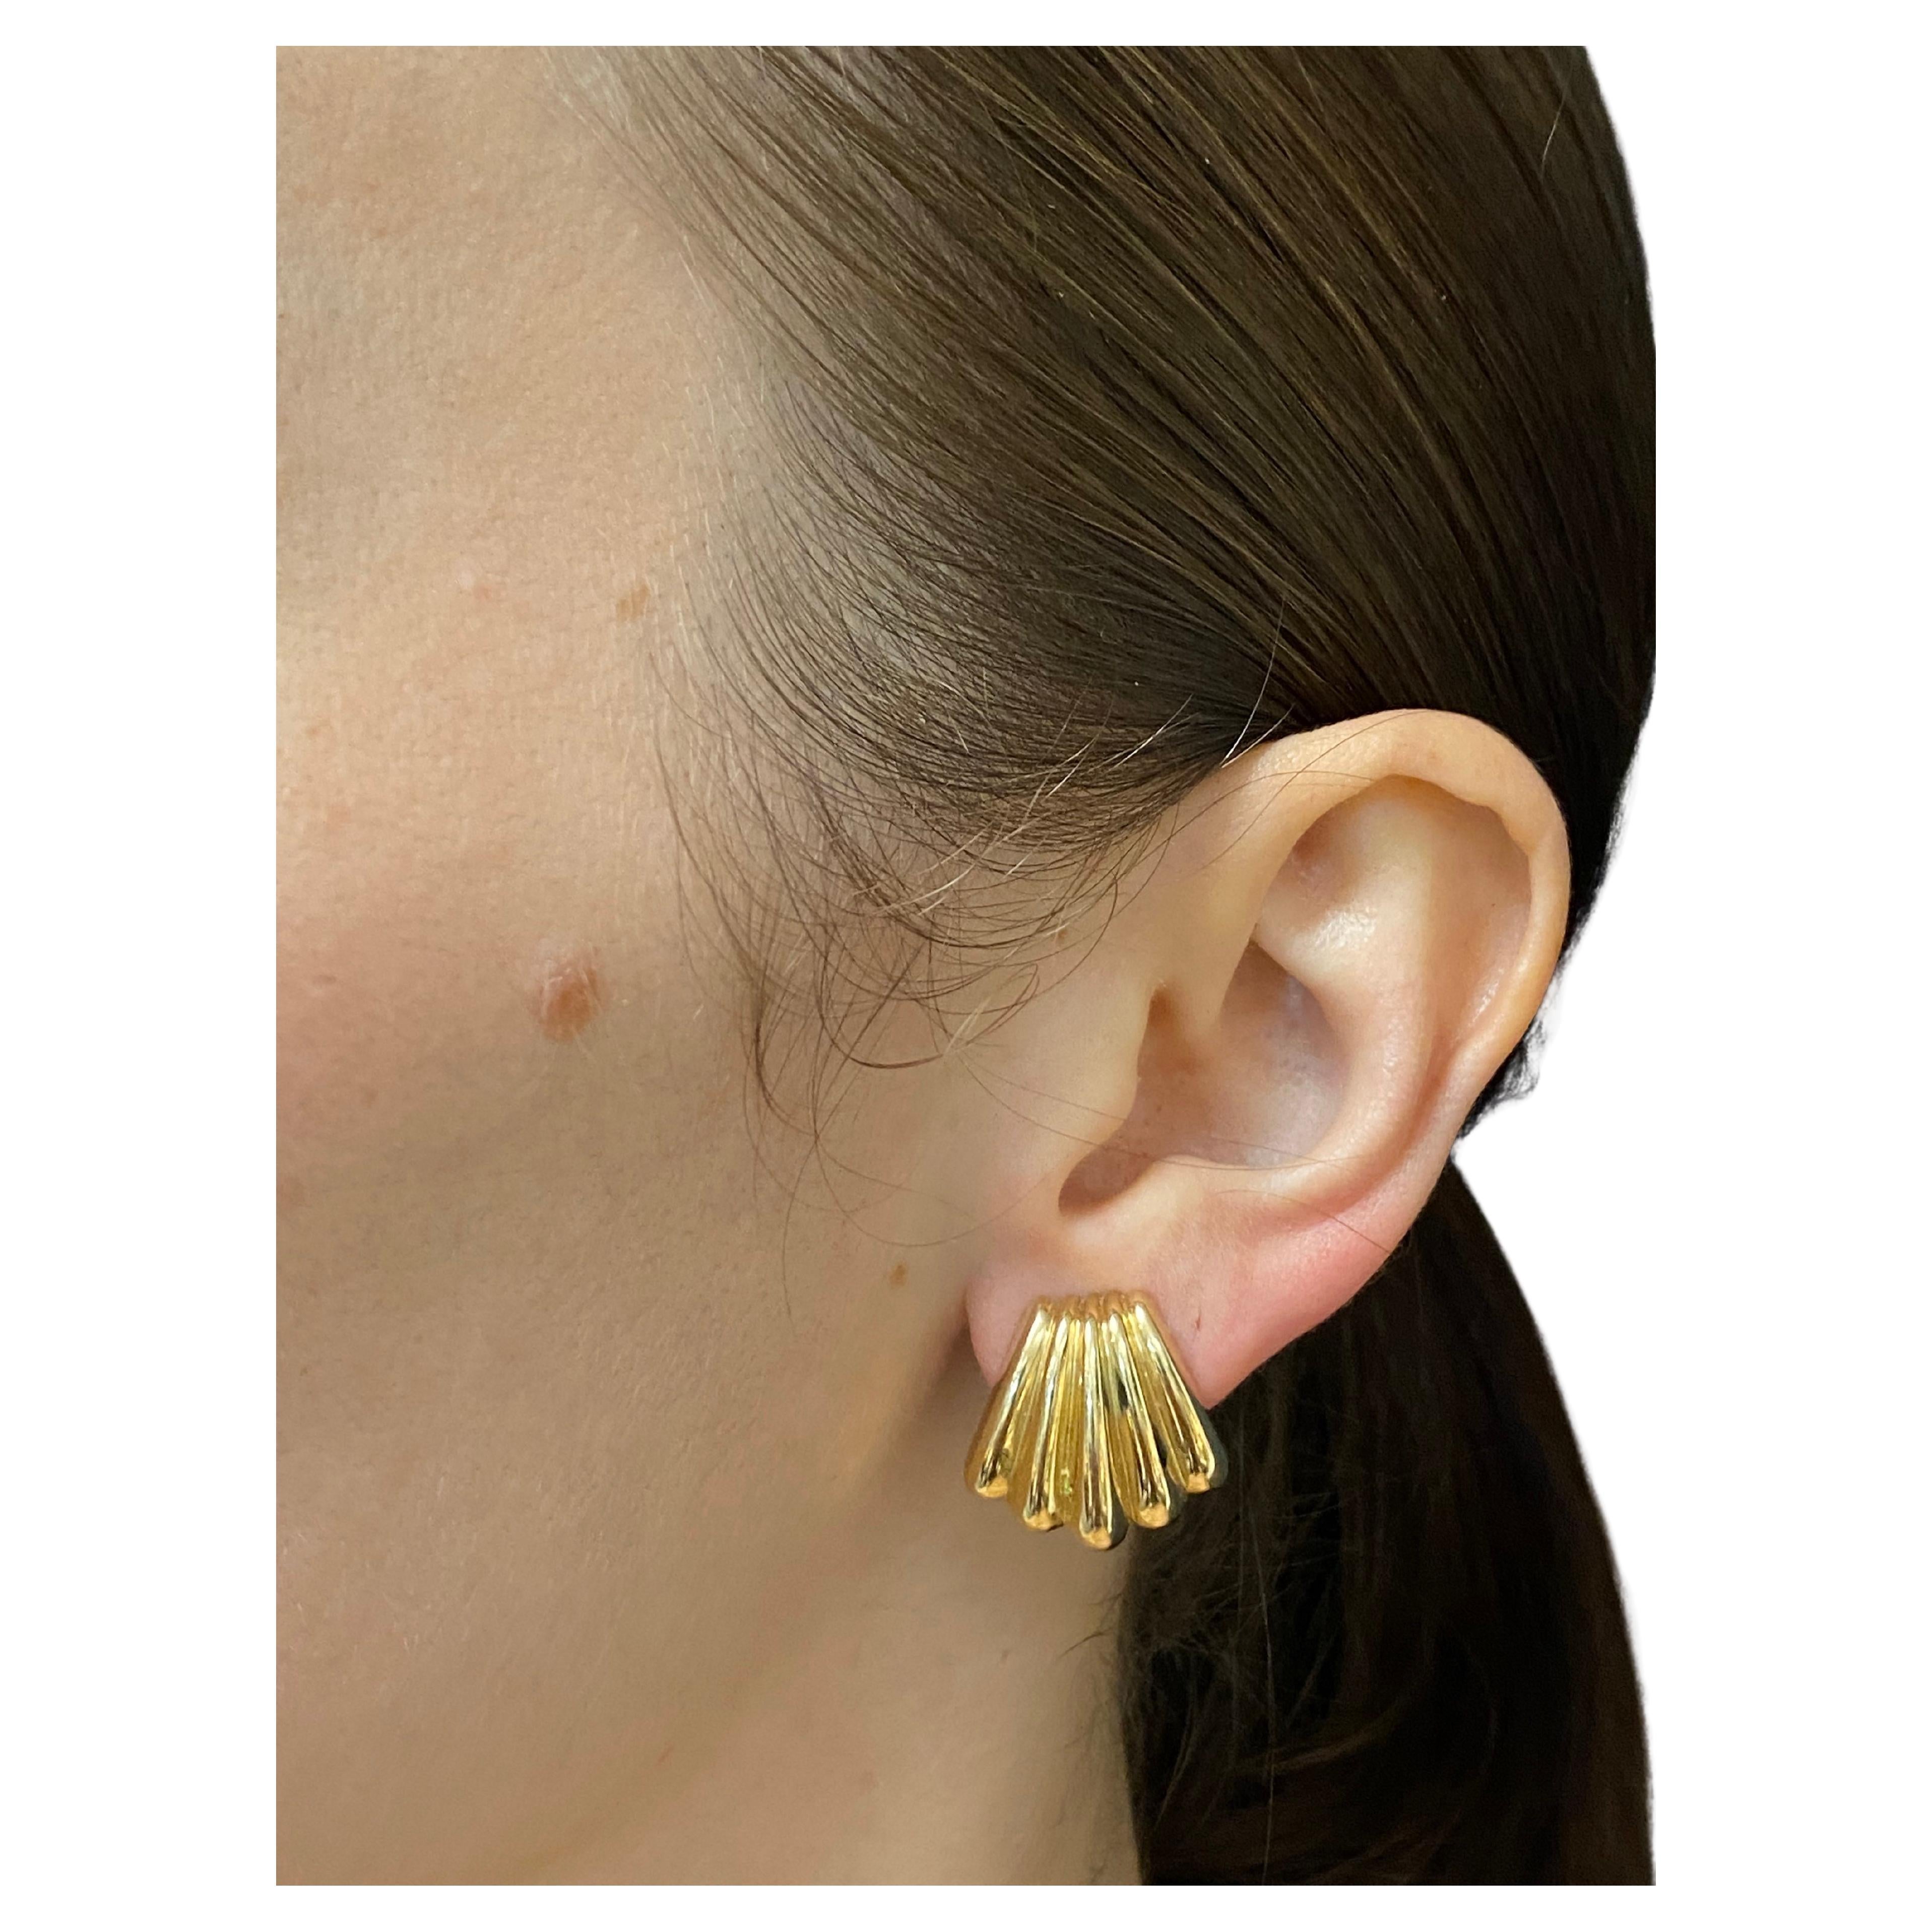 A pair of vintage Tiffany & Co. 14k gold earrings created in shell design. This beautiful everyday pair is made of glossy high polished gold. A great example of vintage jewelry where perfect craftsmanship is paired with excellent design. These silky